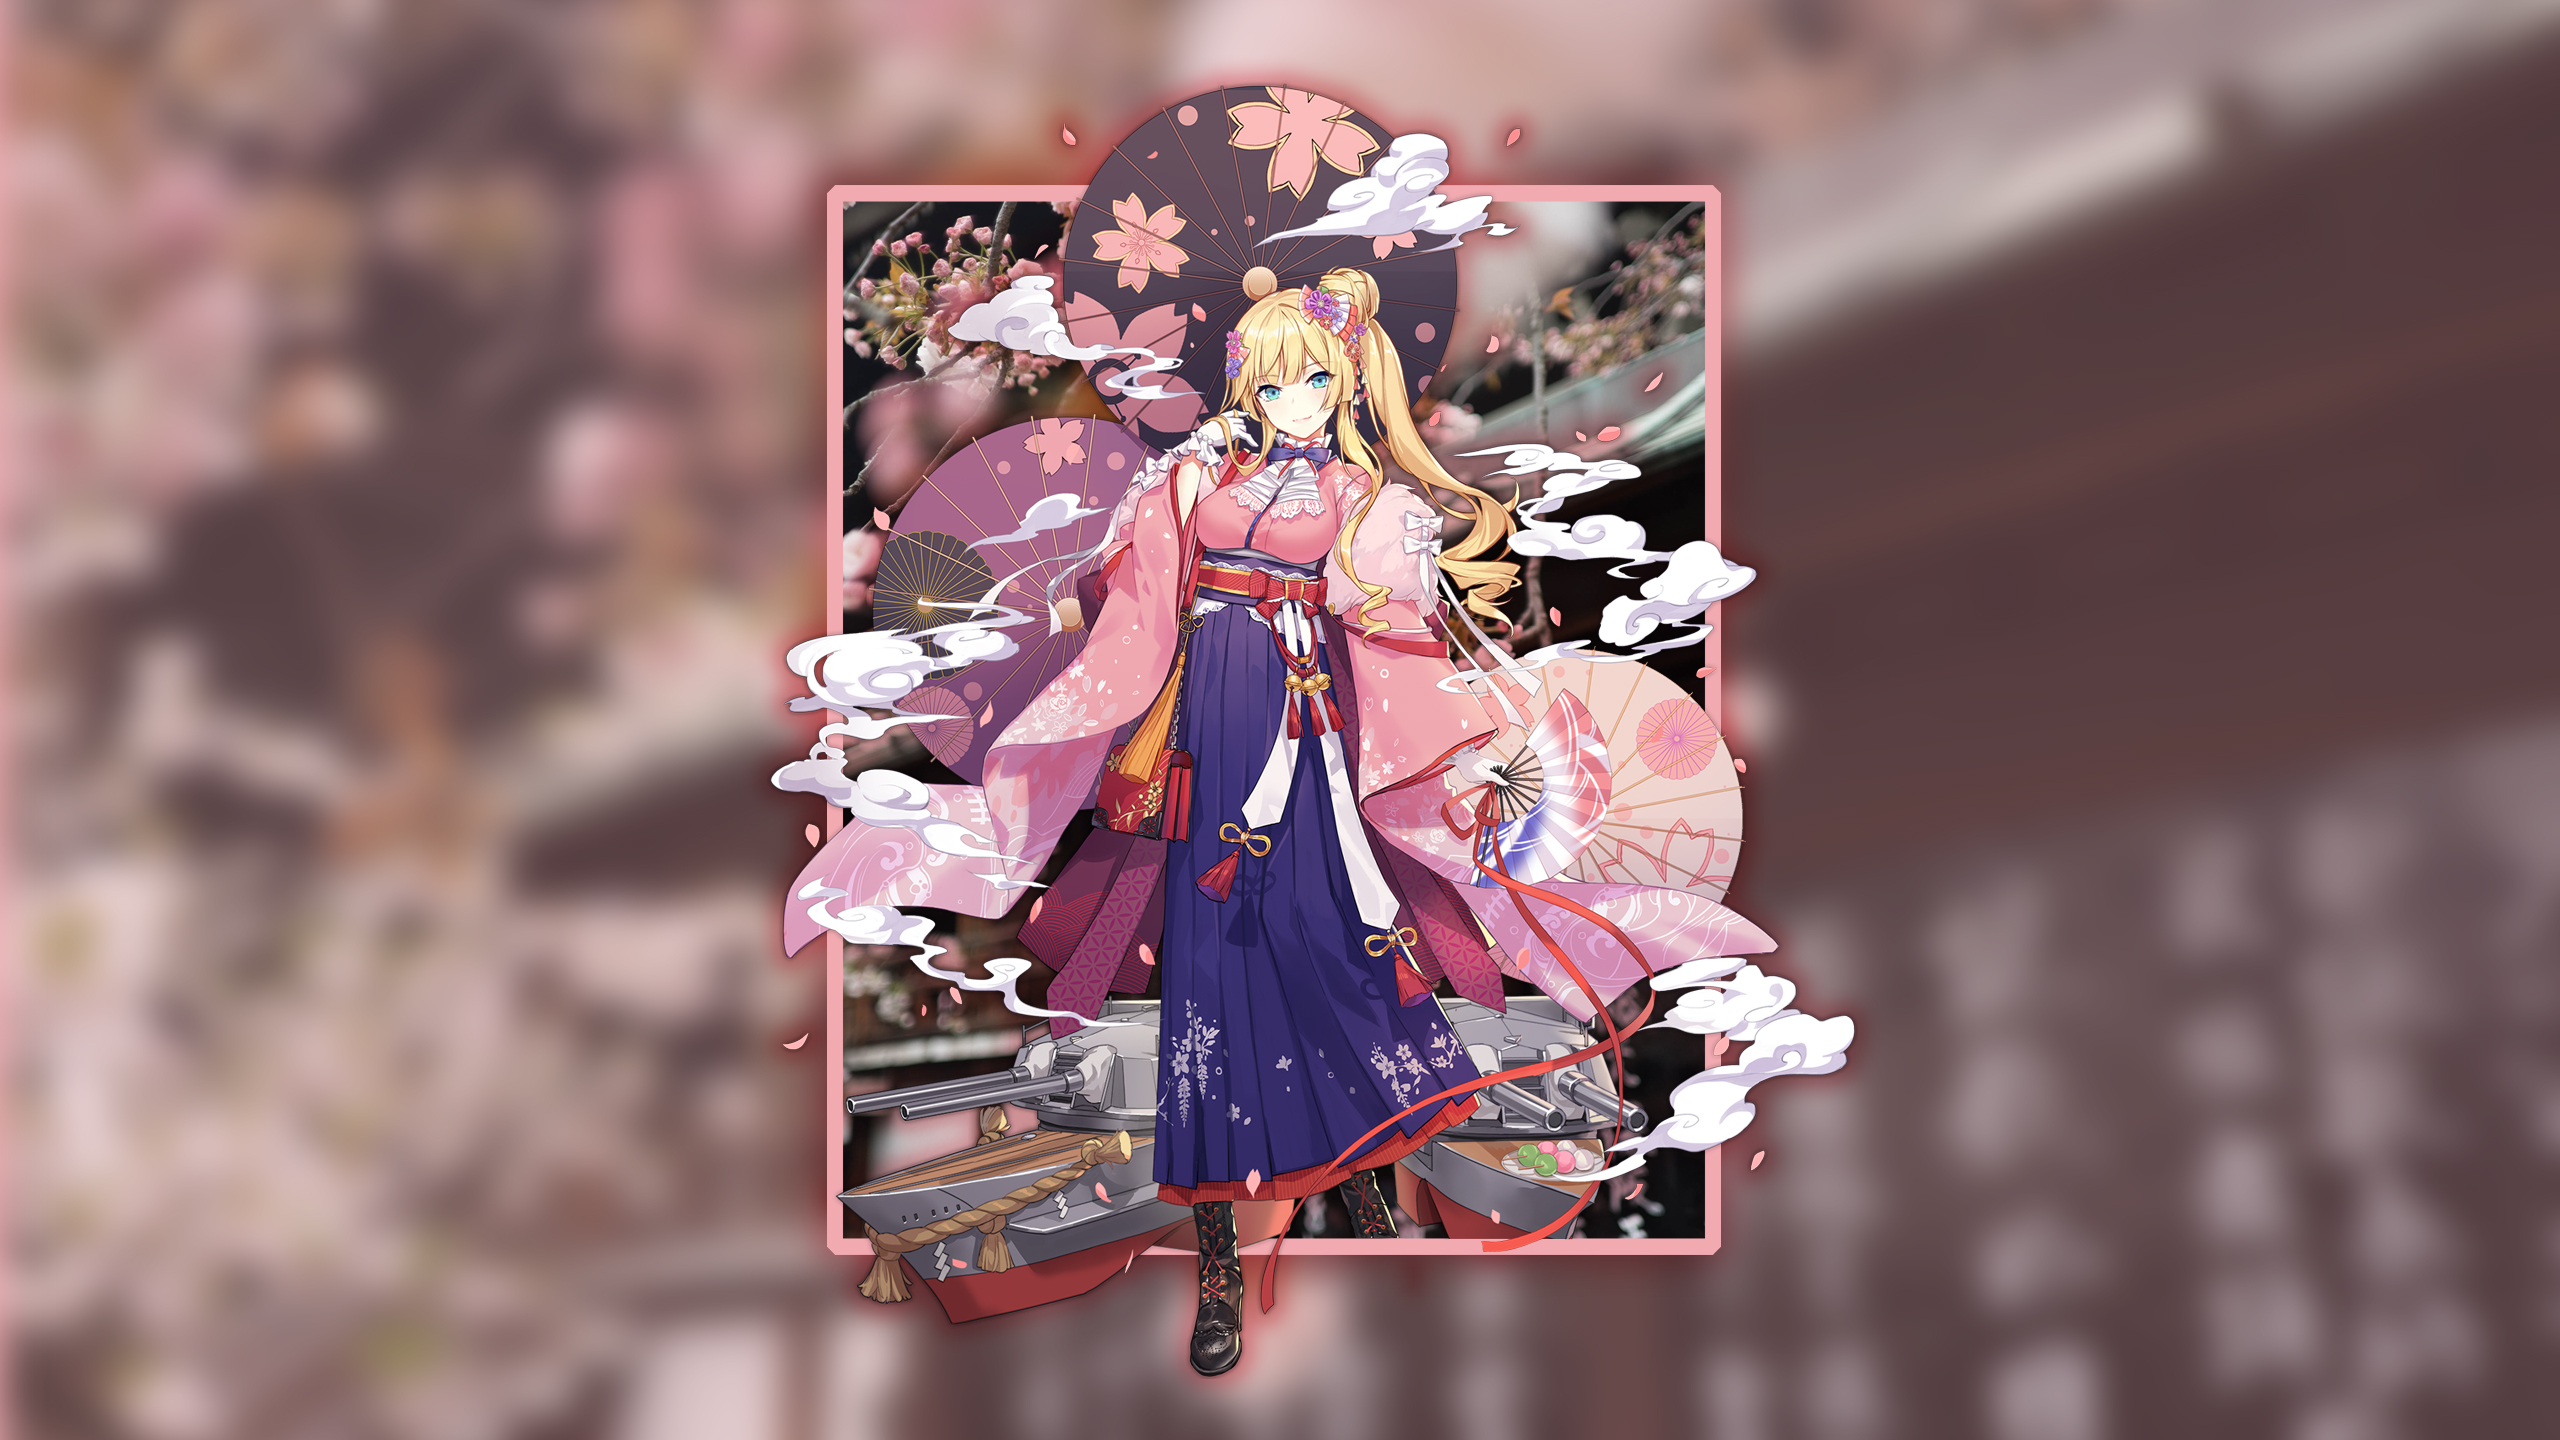 Anime 2560x1440 render in shapes anime picture-in-picture anime girls blonde Japanese clothes